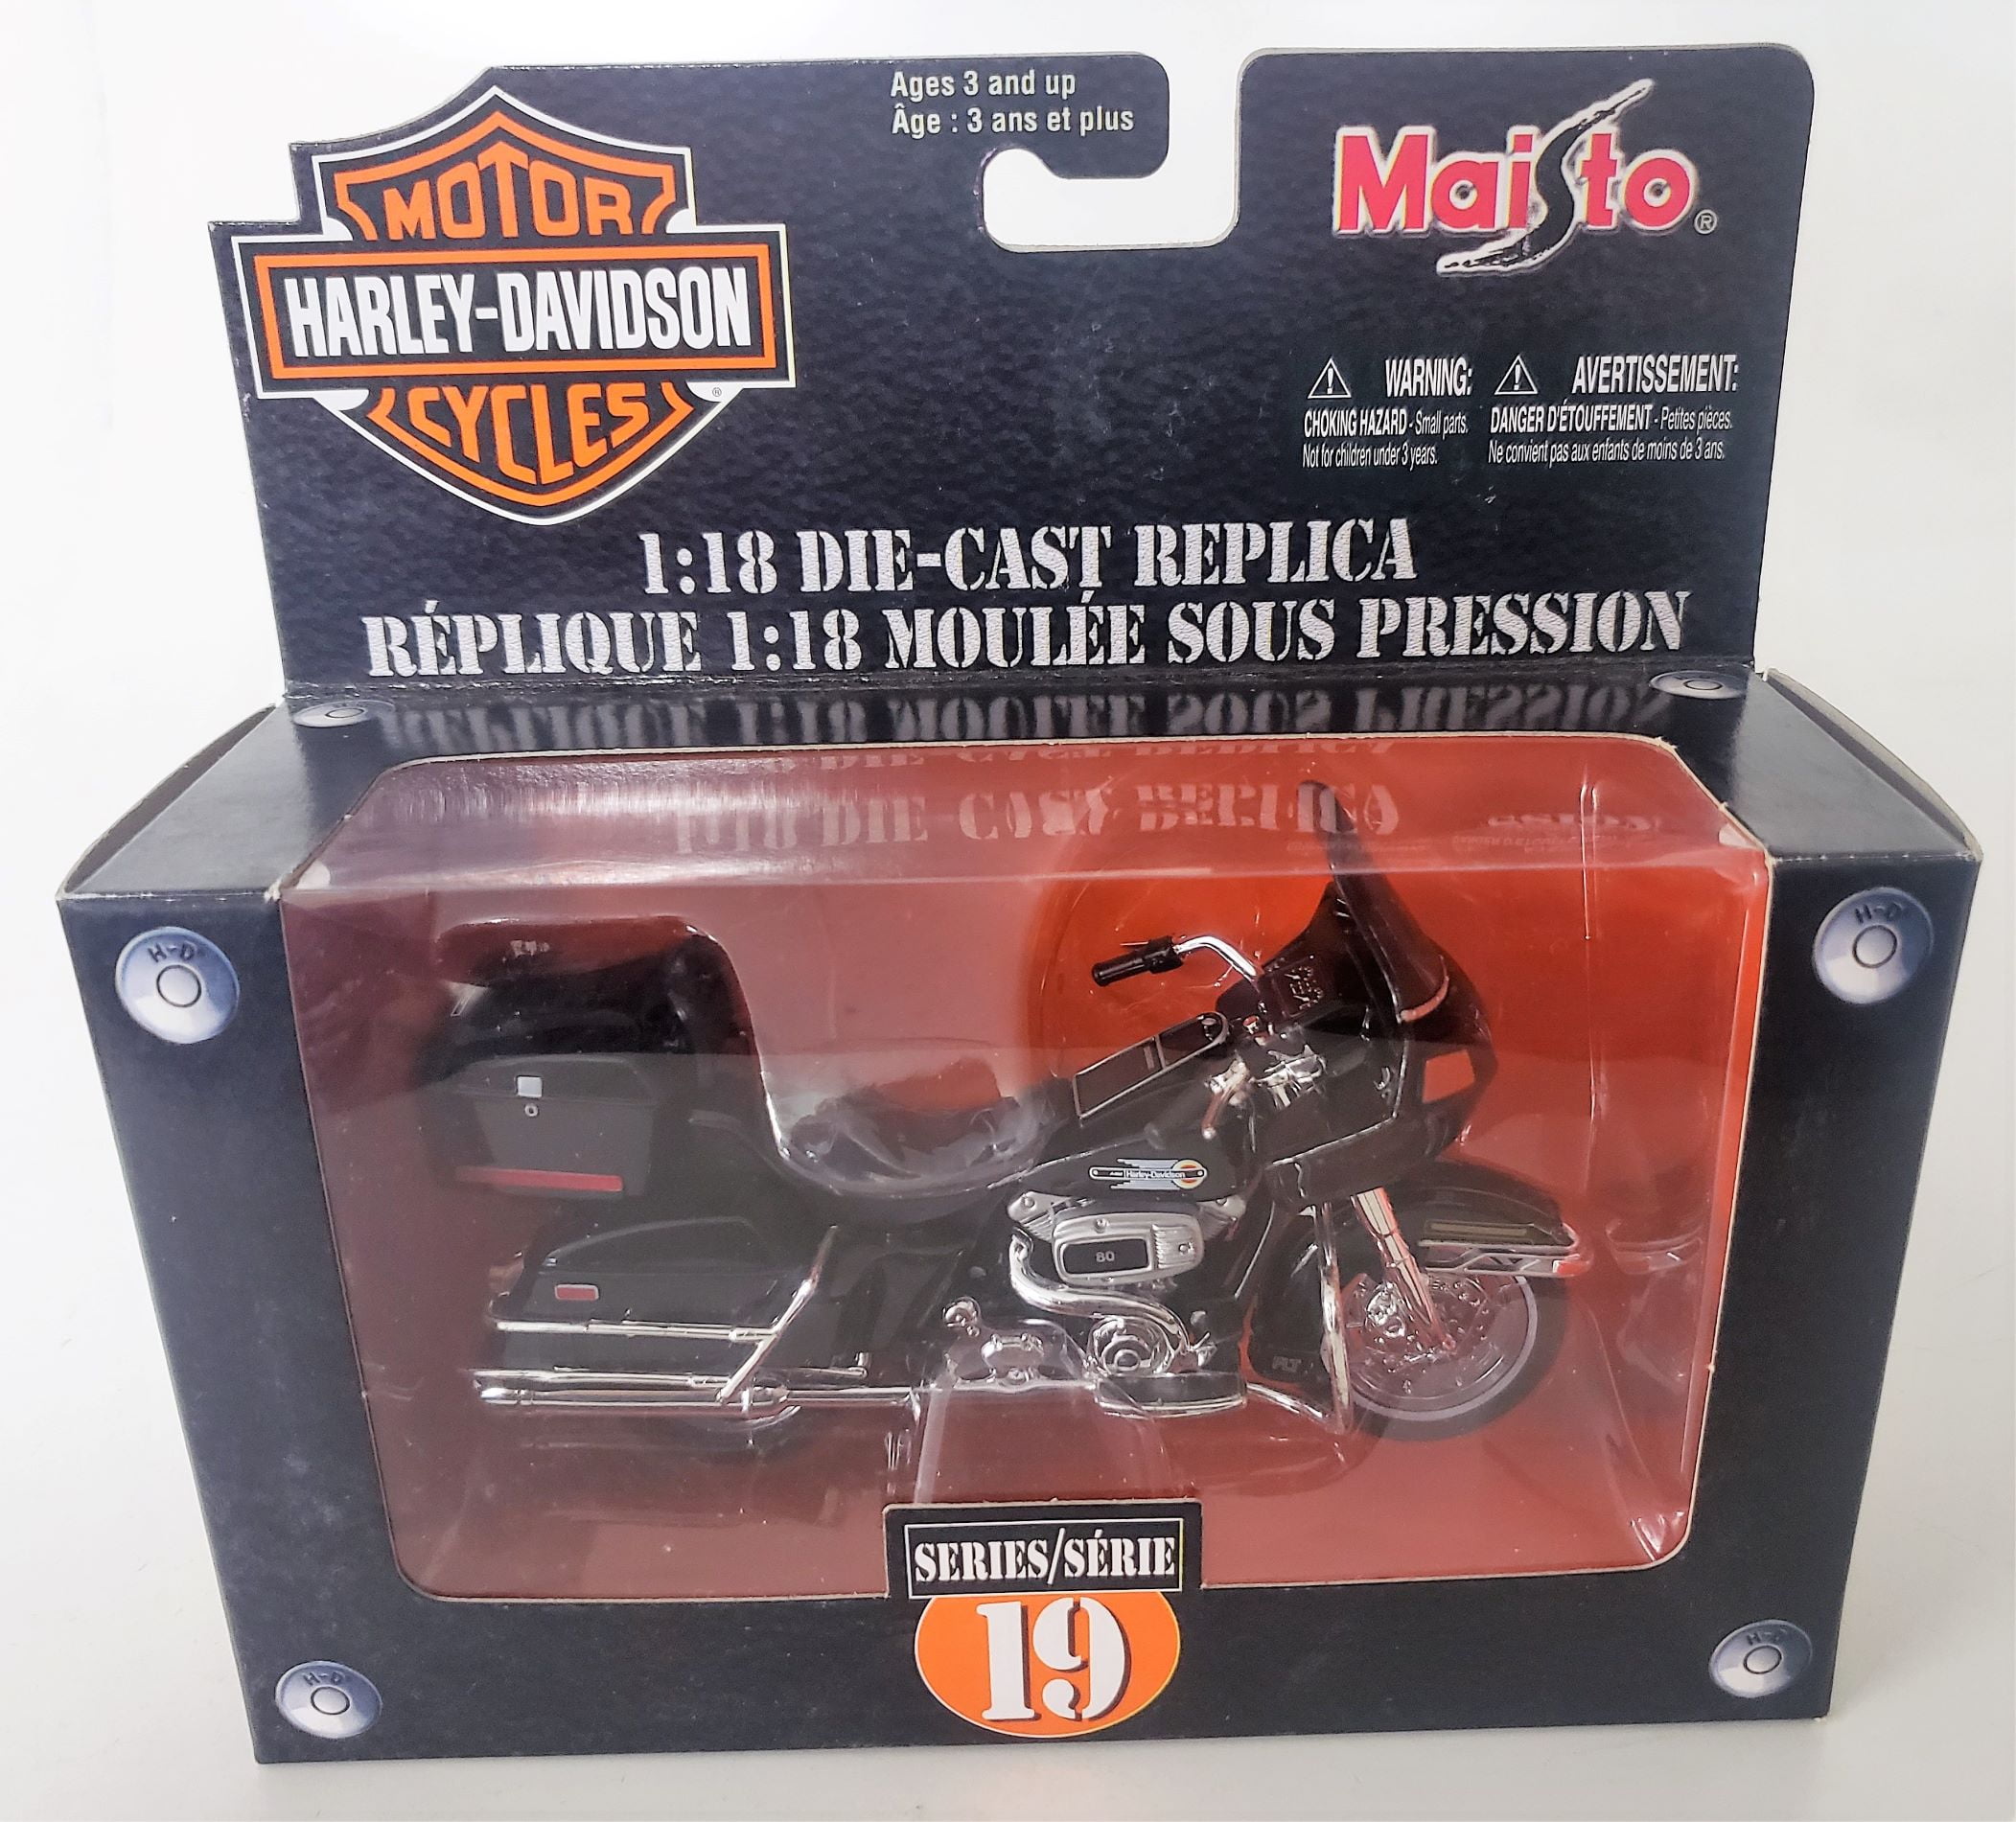 Maisto Harley Davidson Collection Motorcycles 1 18 6 Bikes 2002 for sale online 